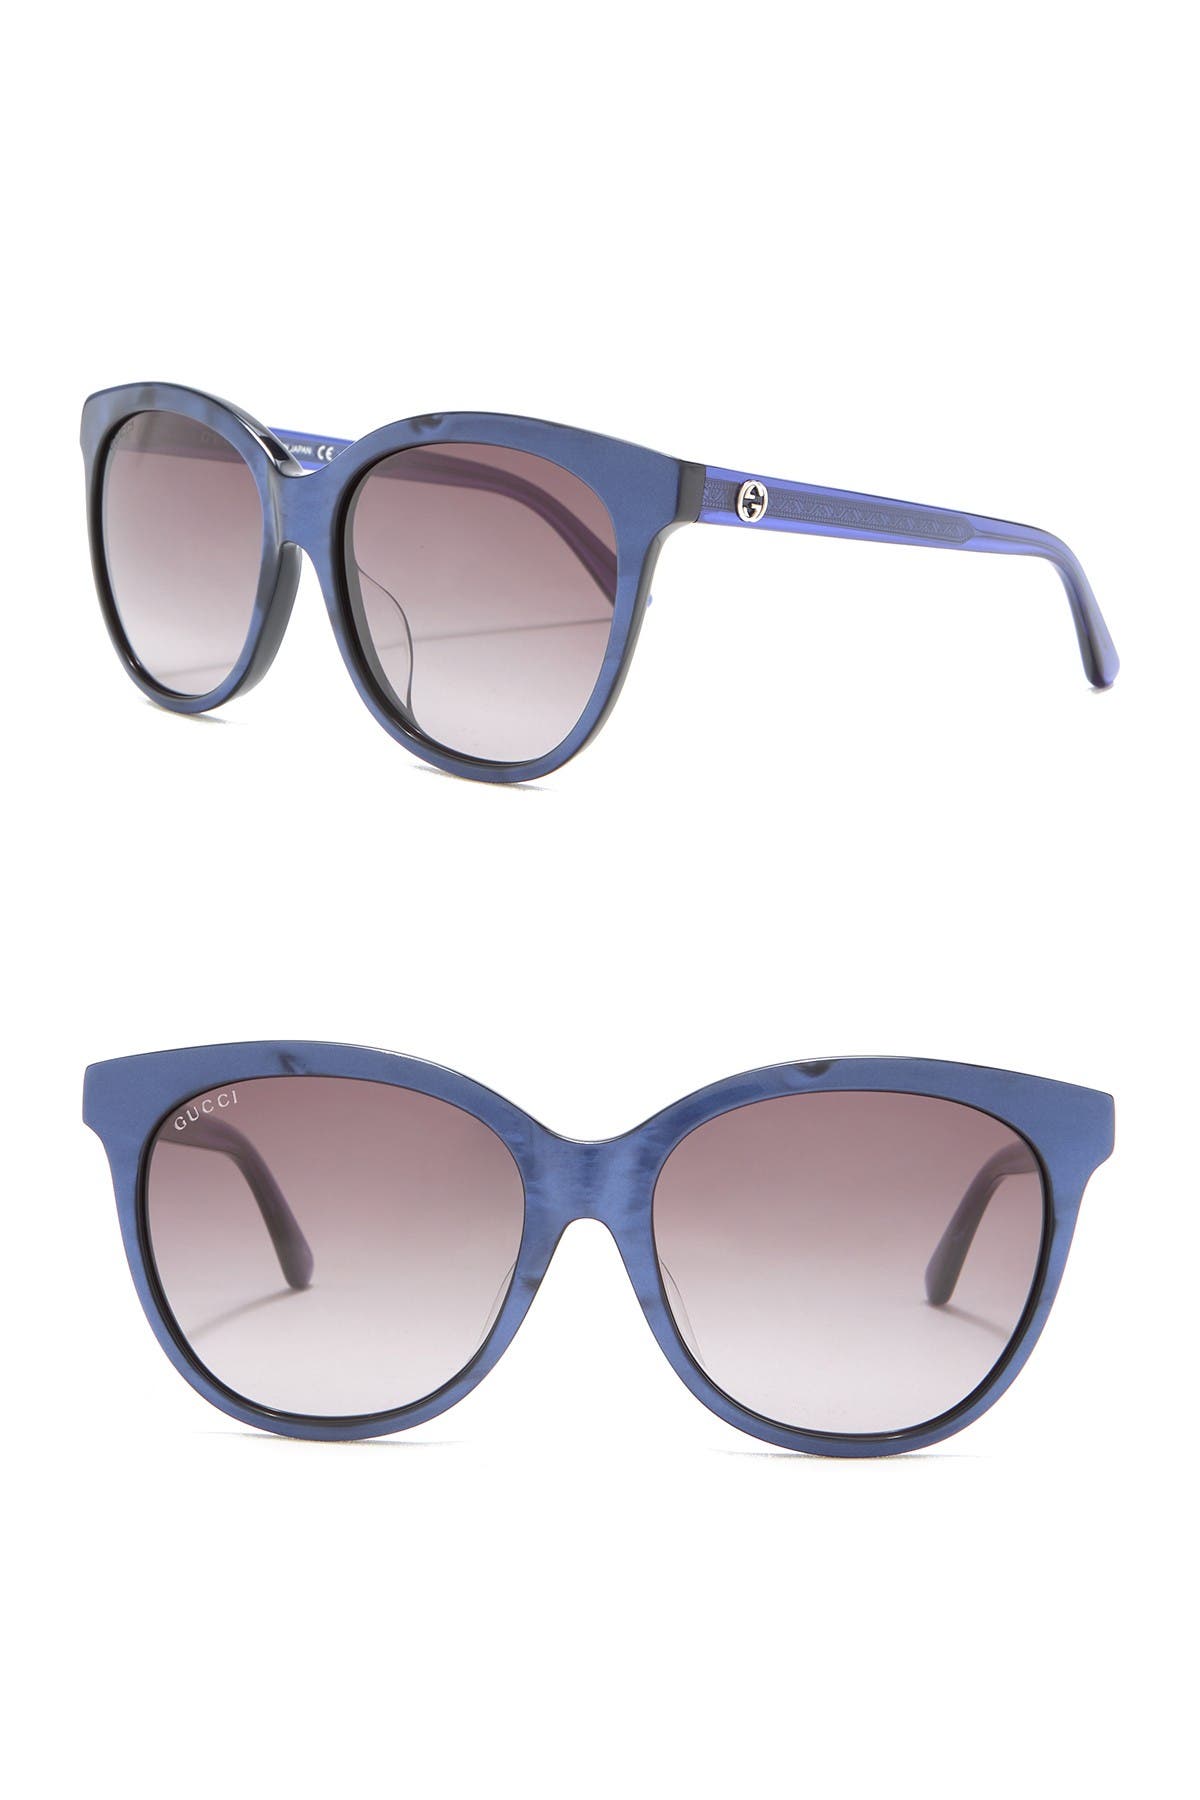 Gucci 56mm Round Sunglasses In Shiny Pearled Blue